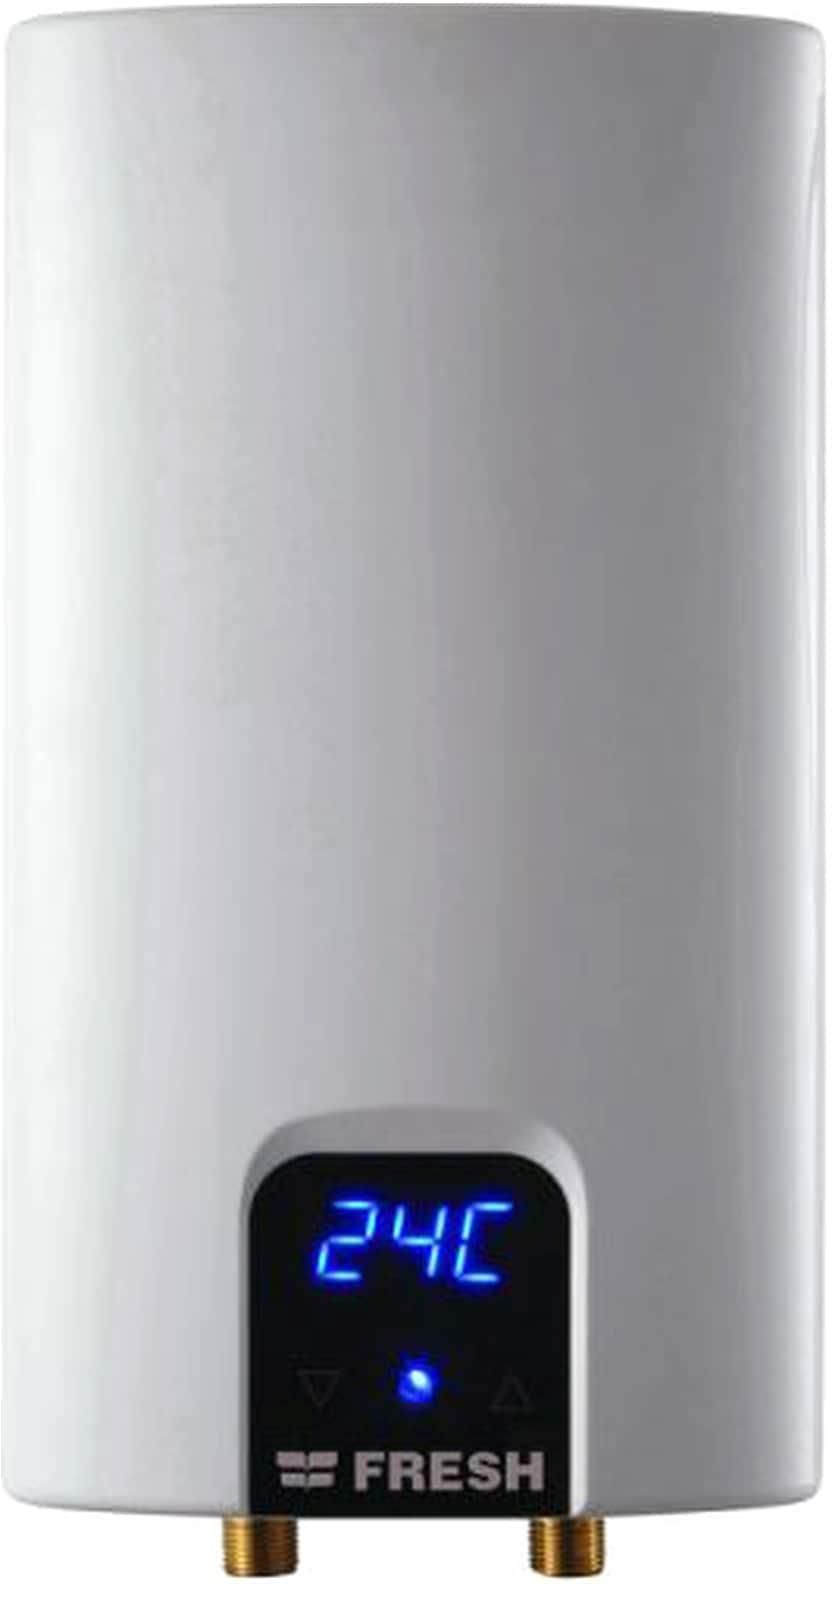 Fresh Instant Electric Water Heater - 9 KW - 500011566